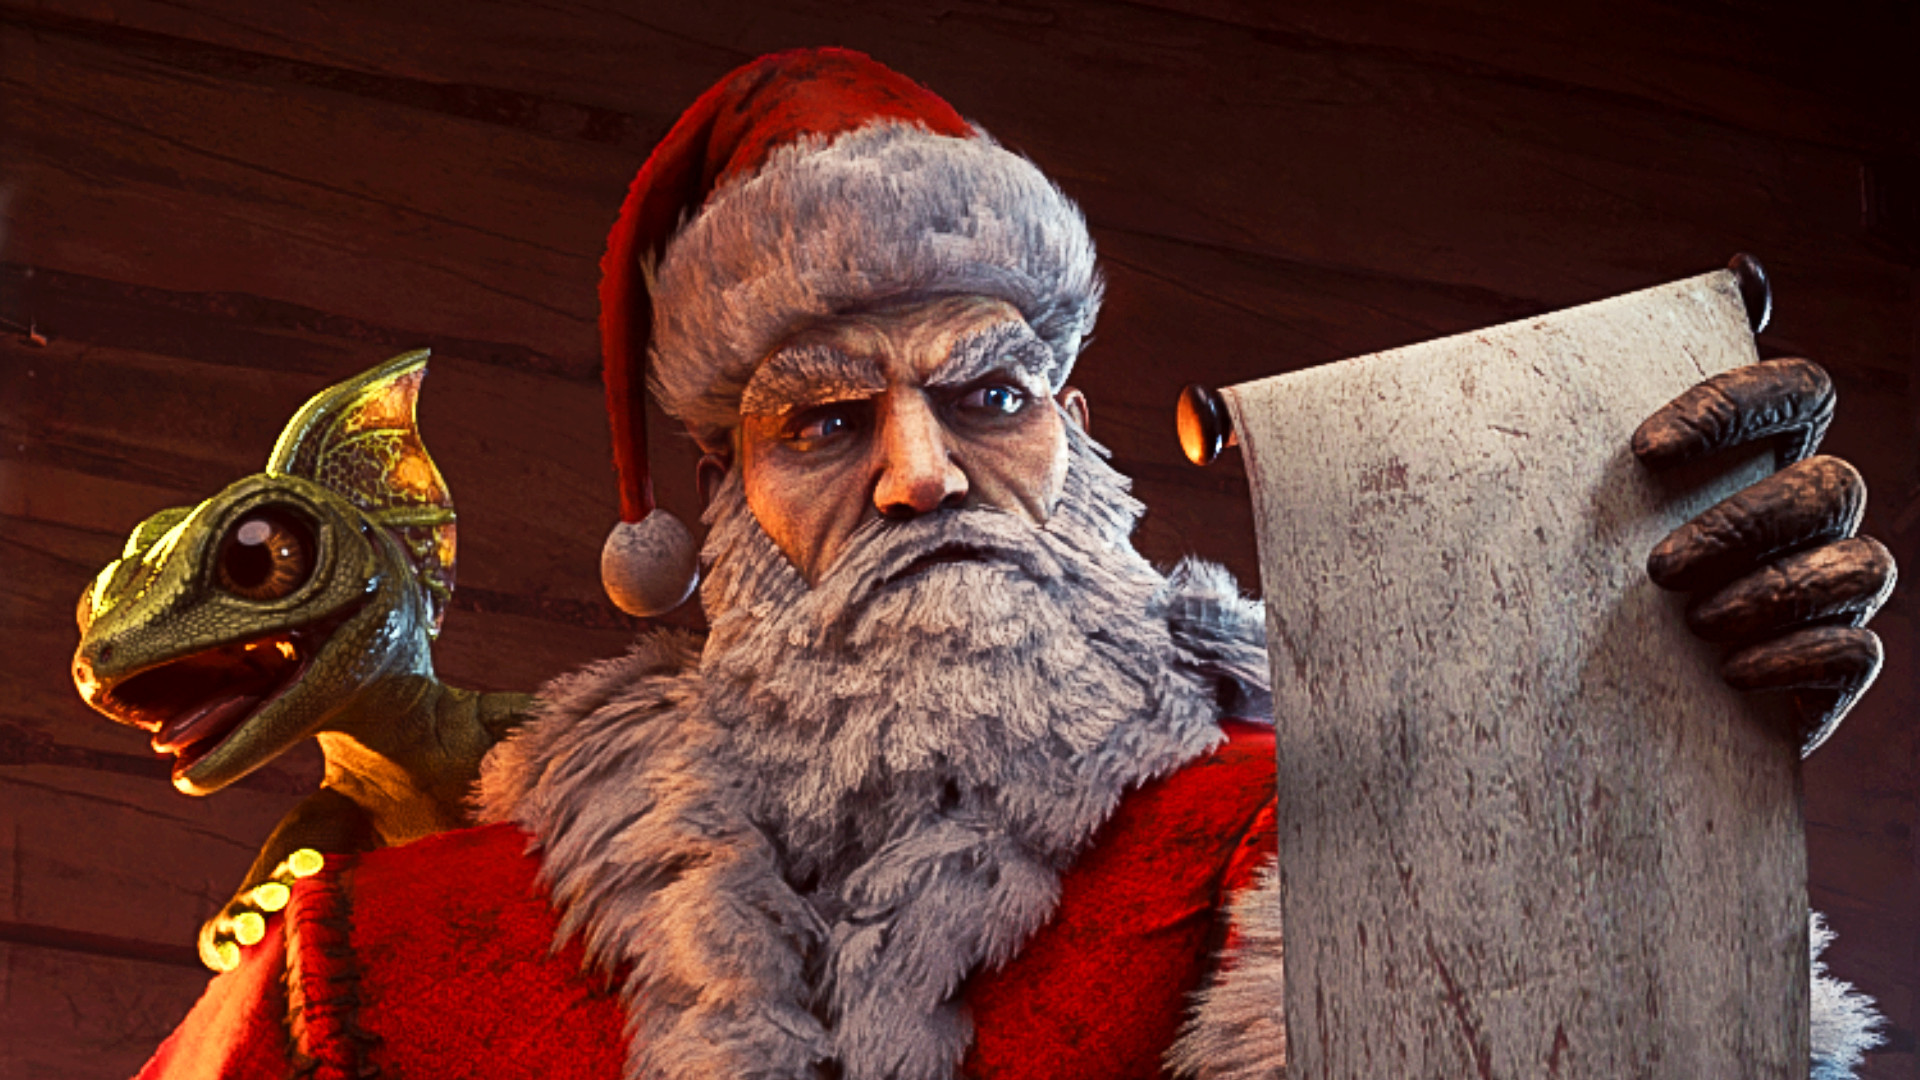 Ark update adds new story and Winter Wonderland event to survival game